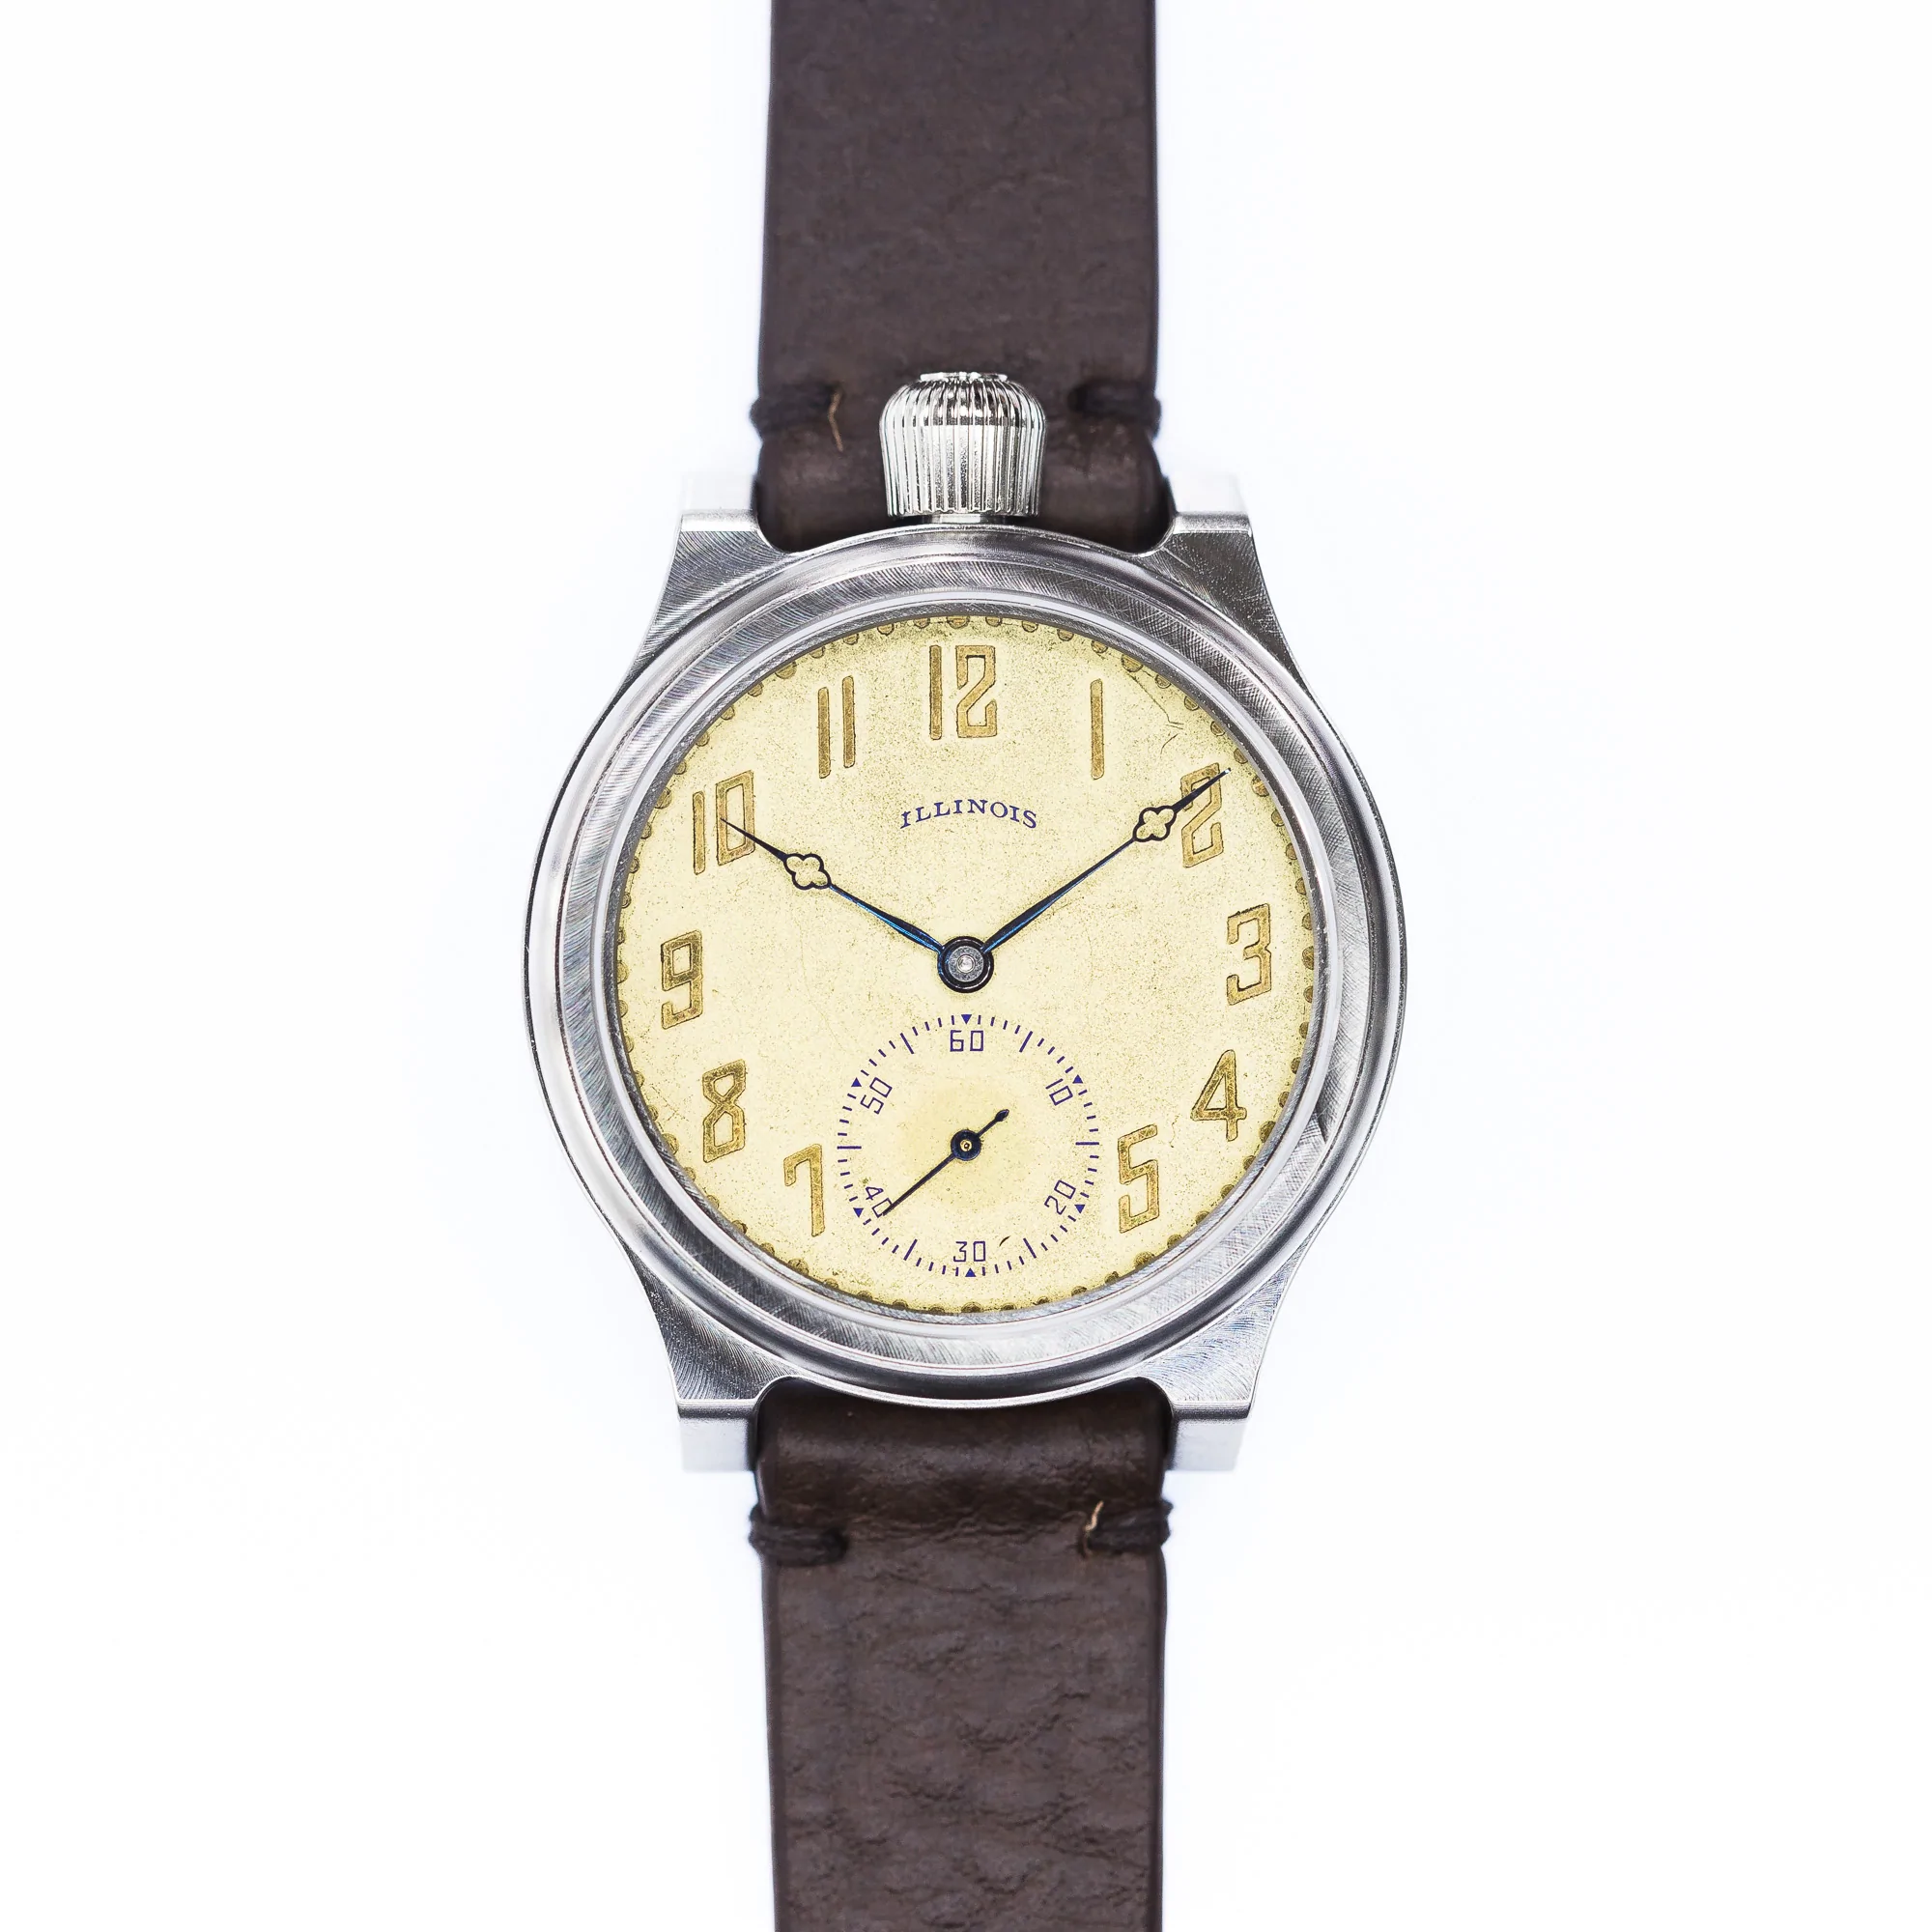 Vortic Watches The Springfield 533 (46mm) posted by ProdOrigin USA in Jewelry